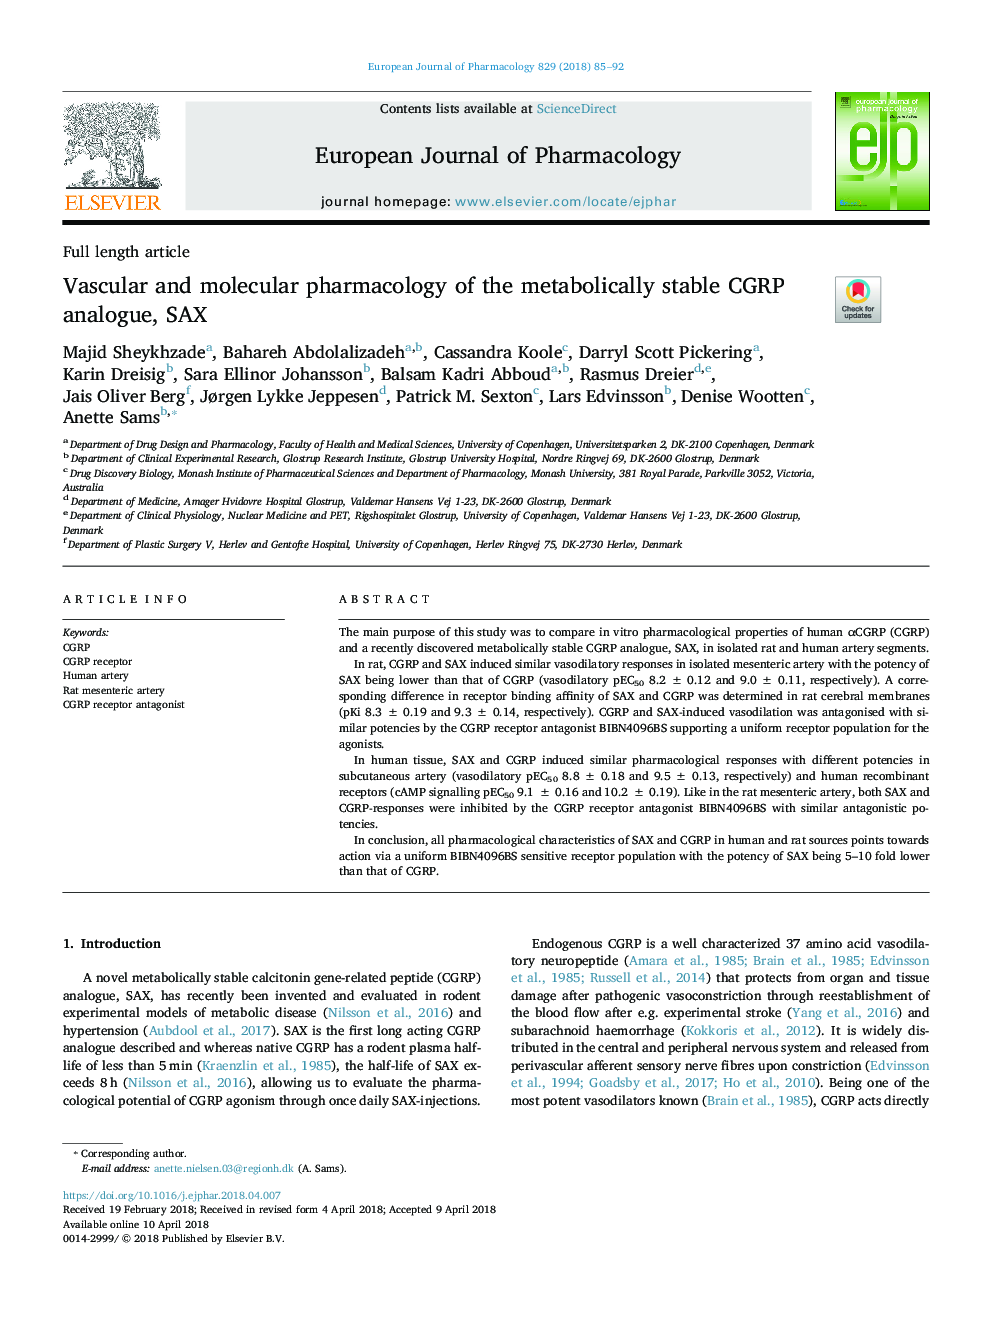 Vascular and molecular pharmacology of the metabolically stable CGRP analogue, SAX